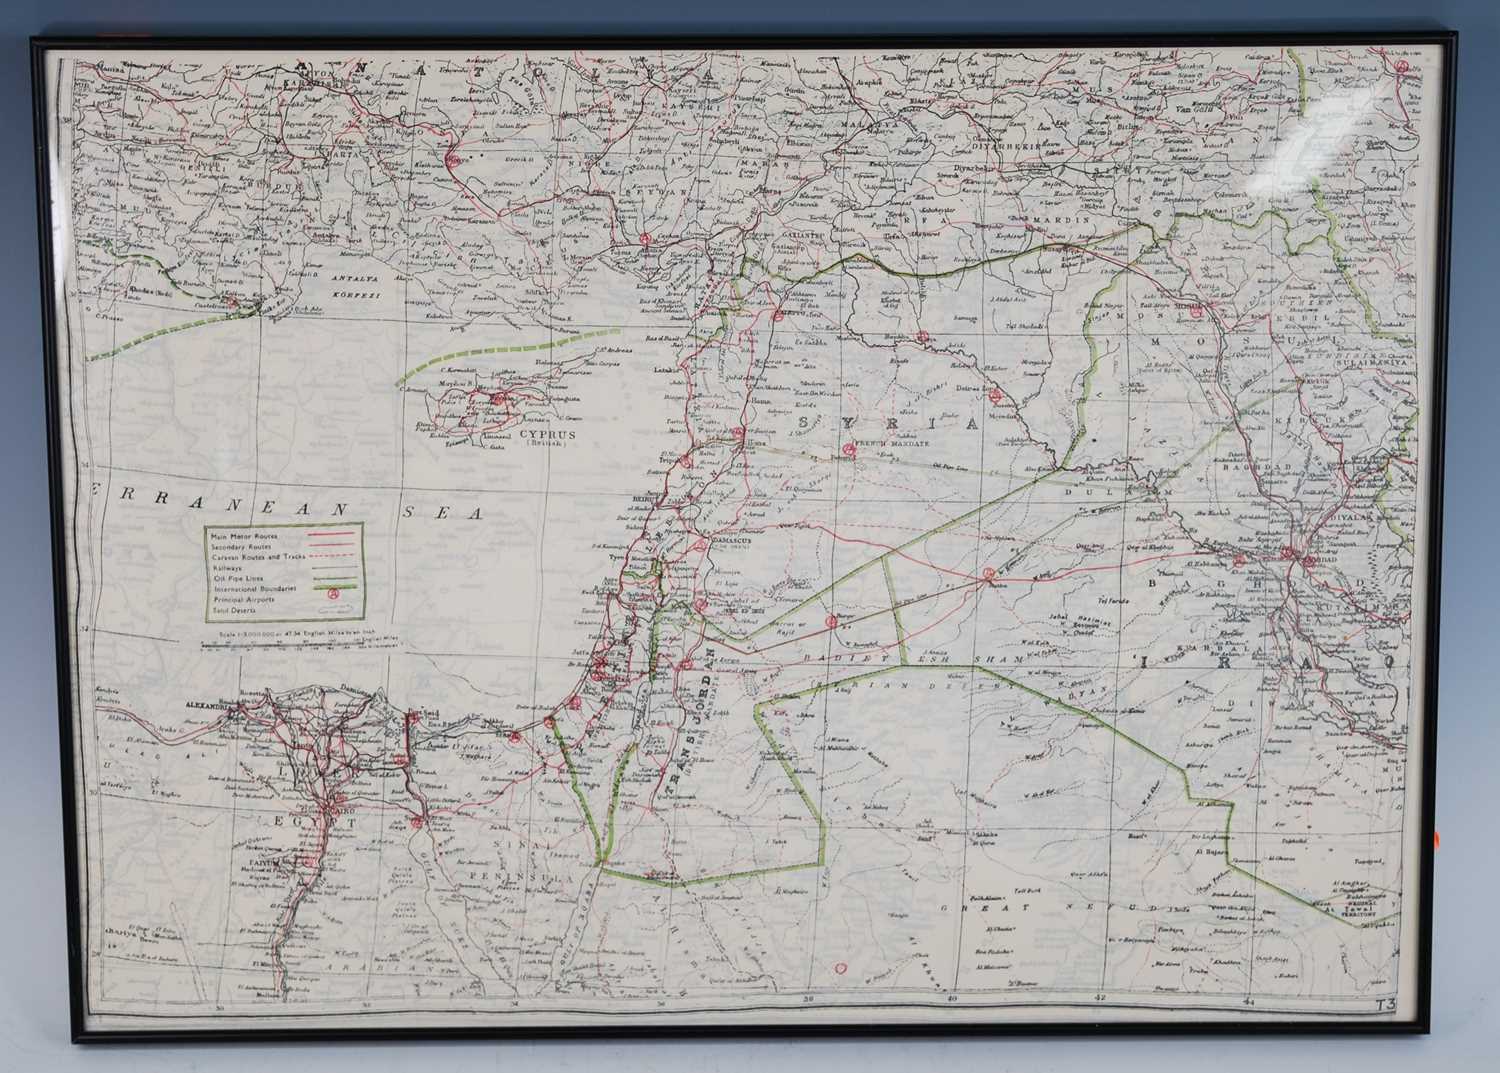 A WW II double sided silk map of North Africa, scale 1:3,000.000 or 47.34 English miles to an